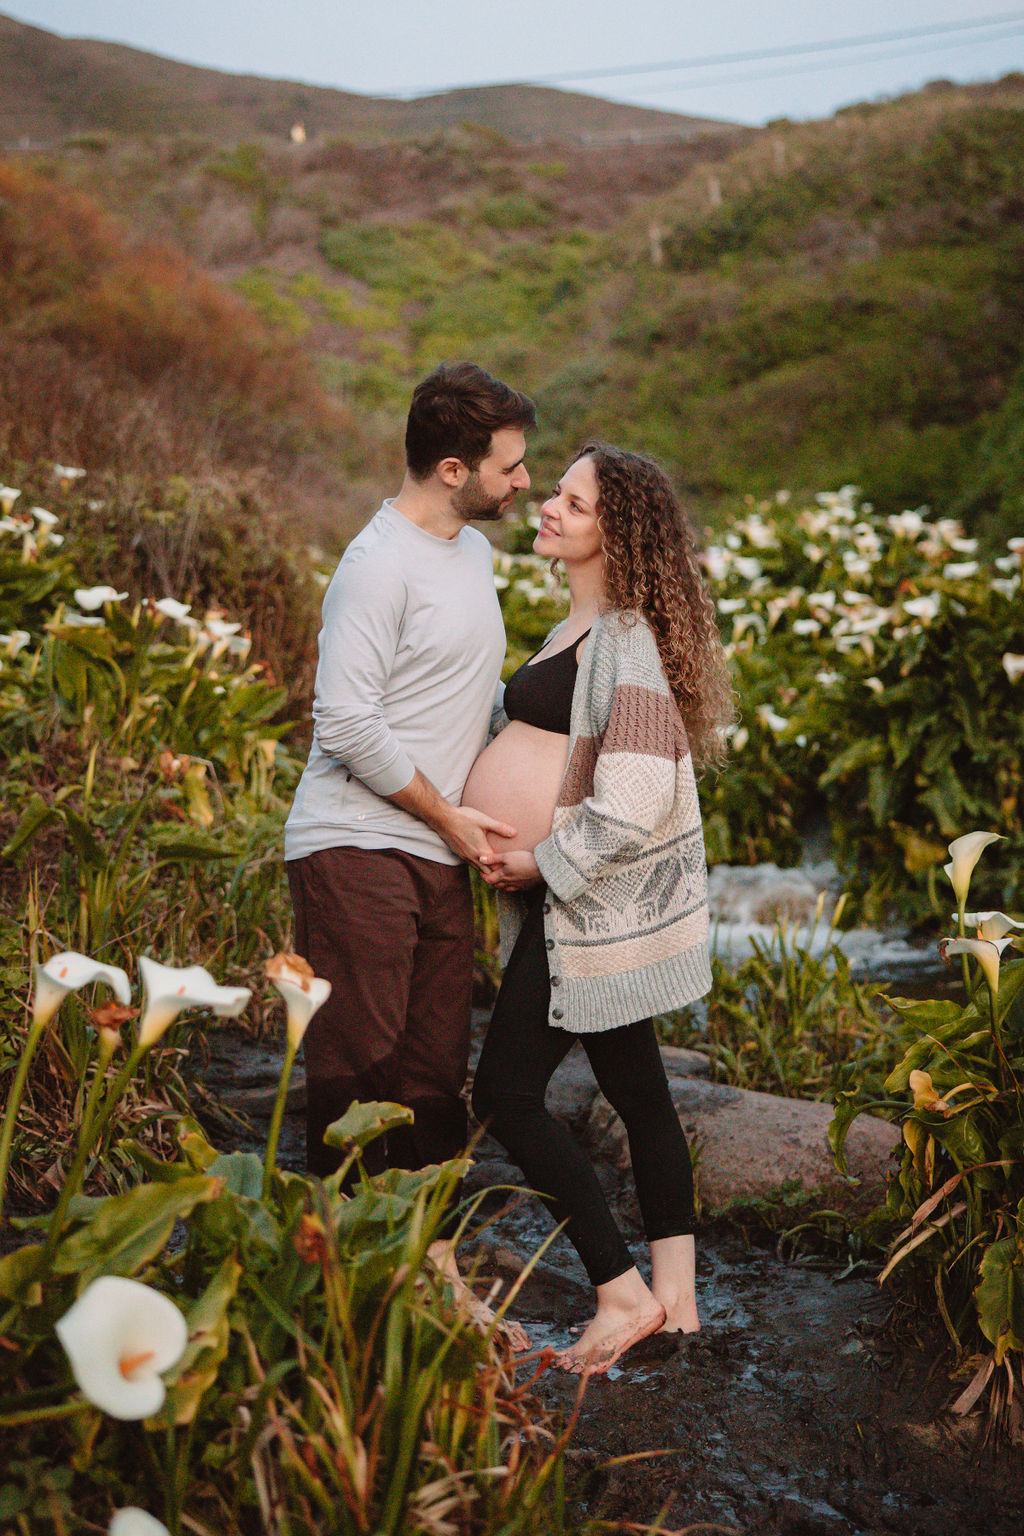 A couple expecting a baby, sharing a tender moment amidst a field of white flowers at Big Sur